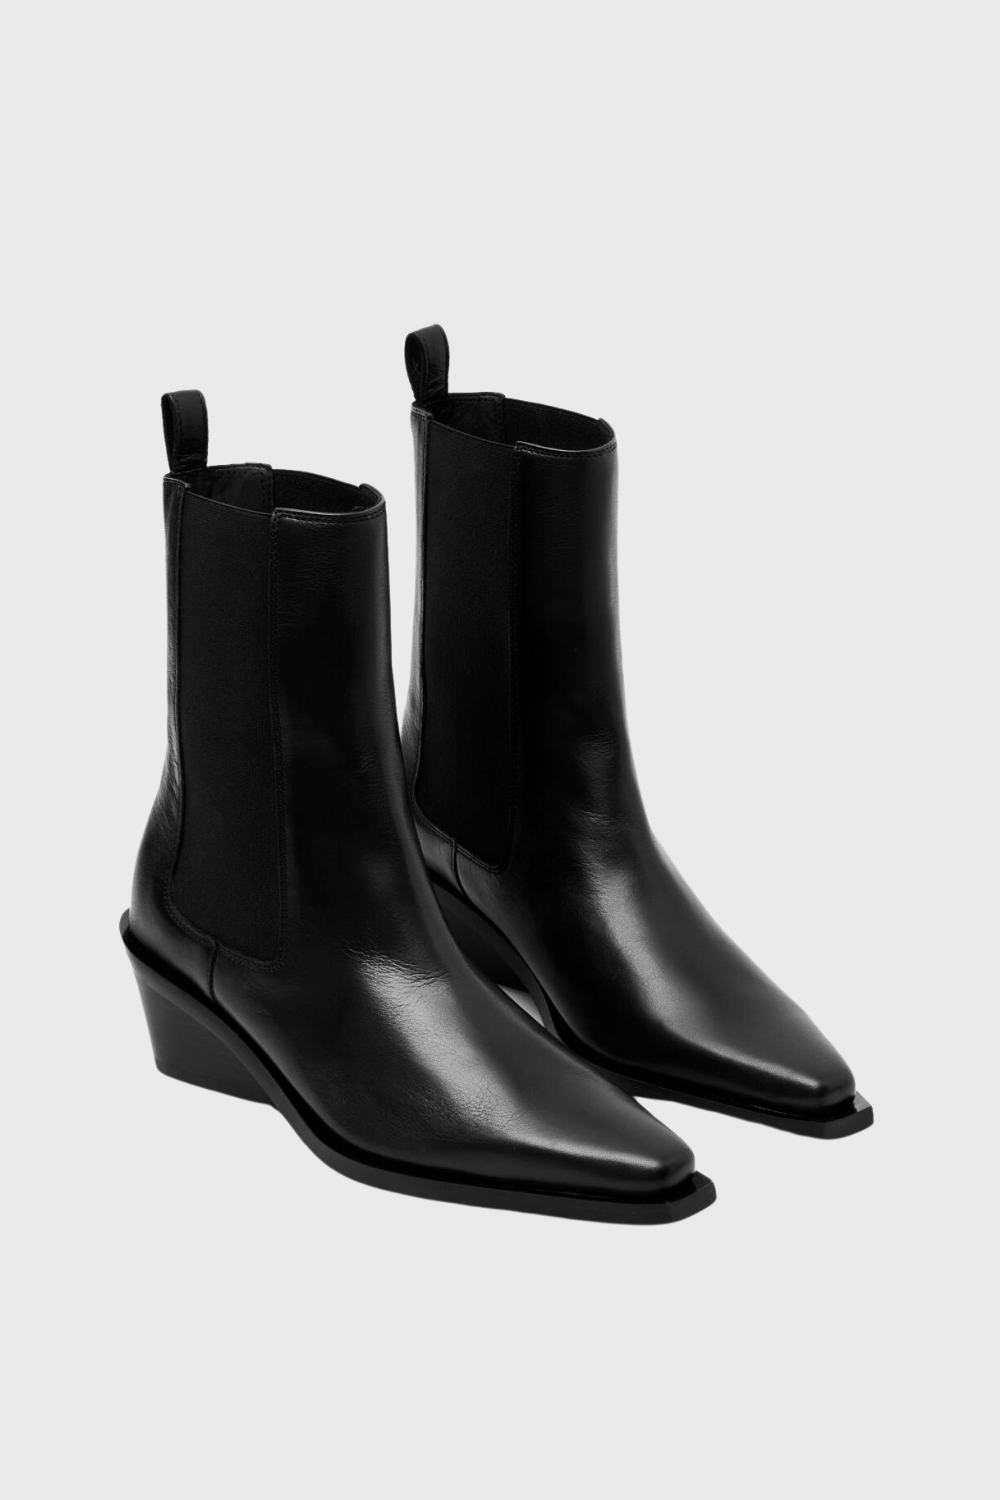 leather cowboy chelsea boots